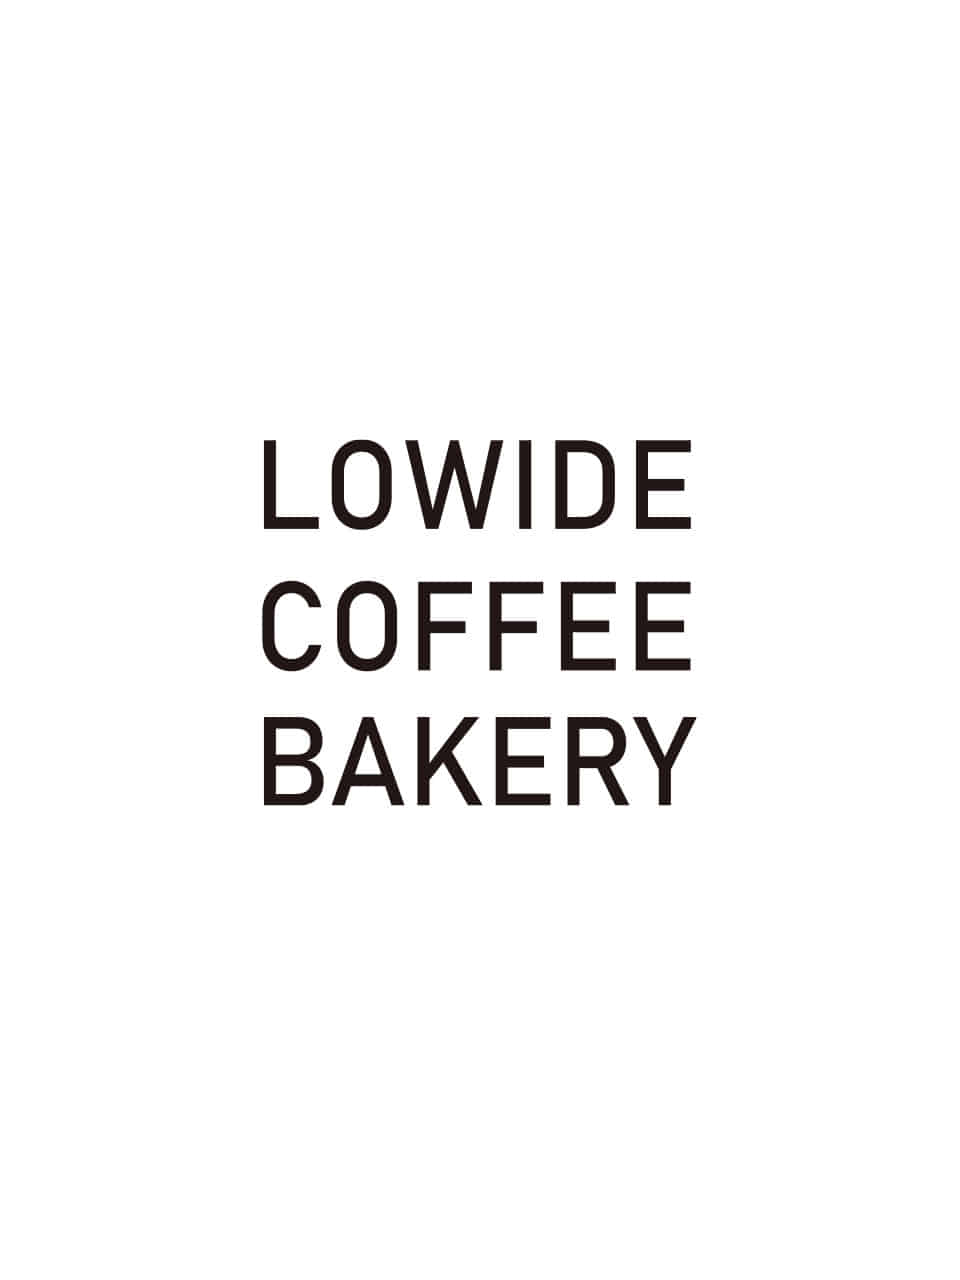 LOWIDE CAKE ORDER